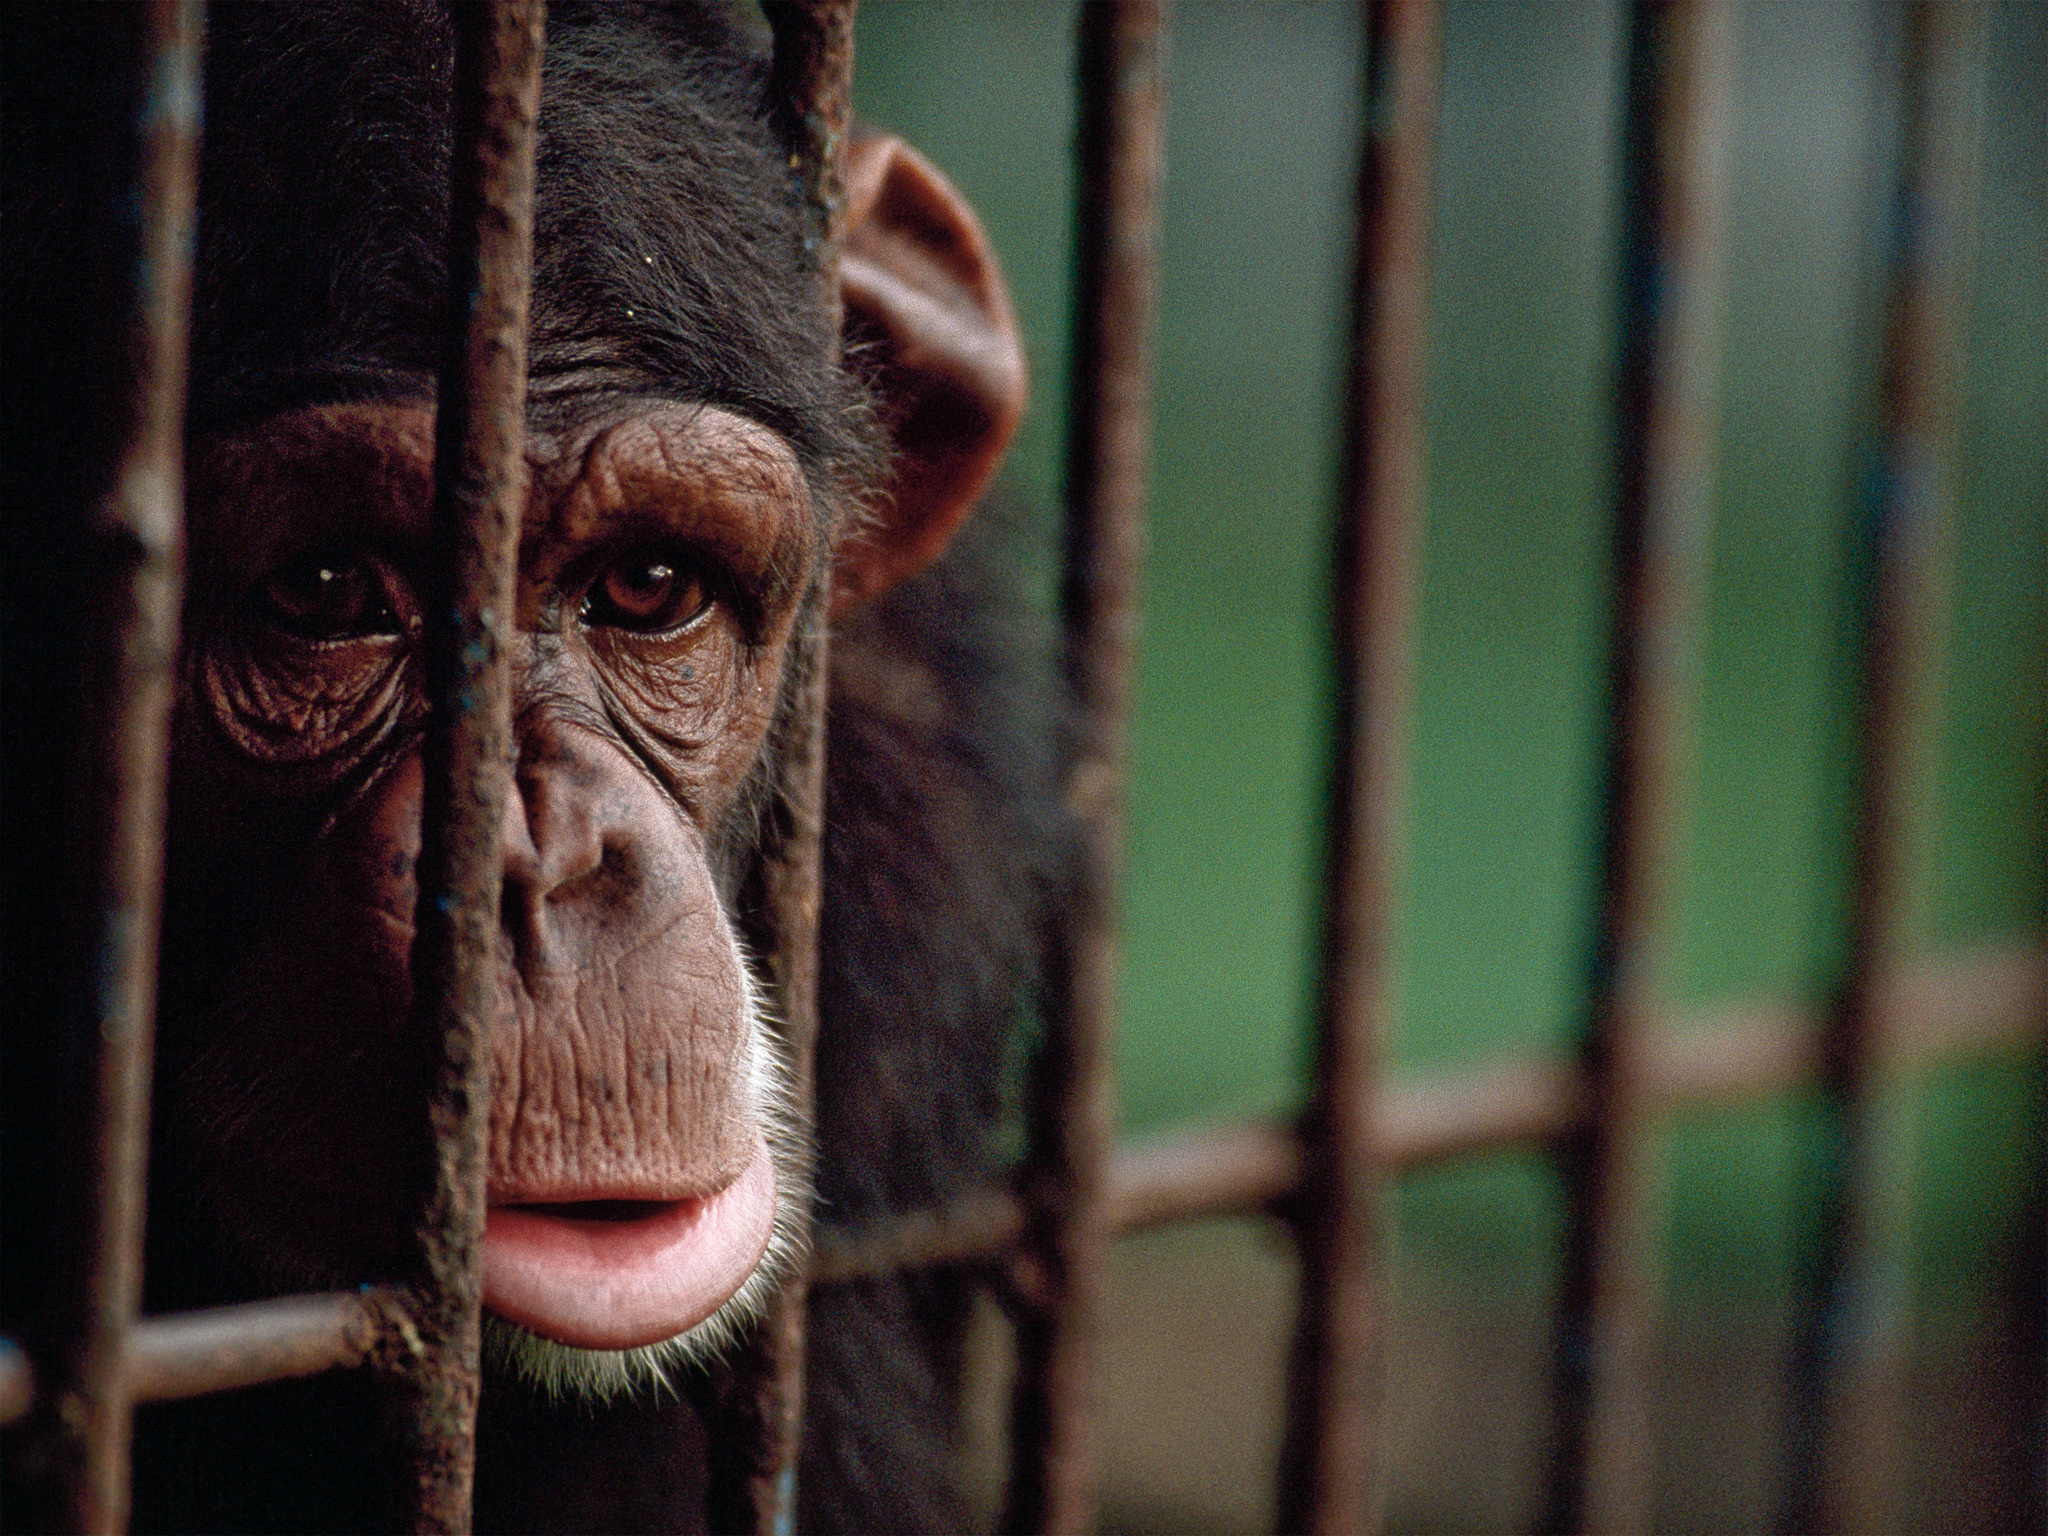 A chimpanzee sits in a cage.